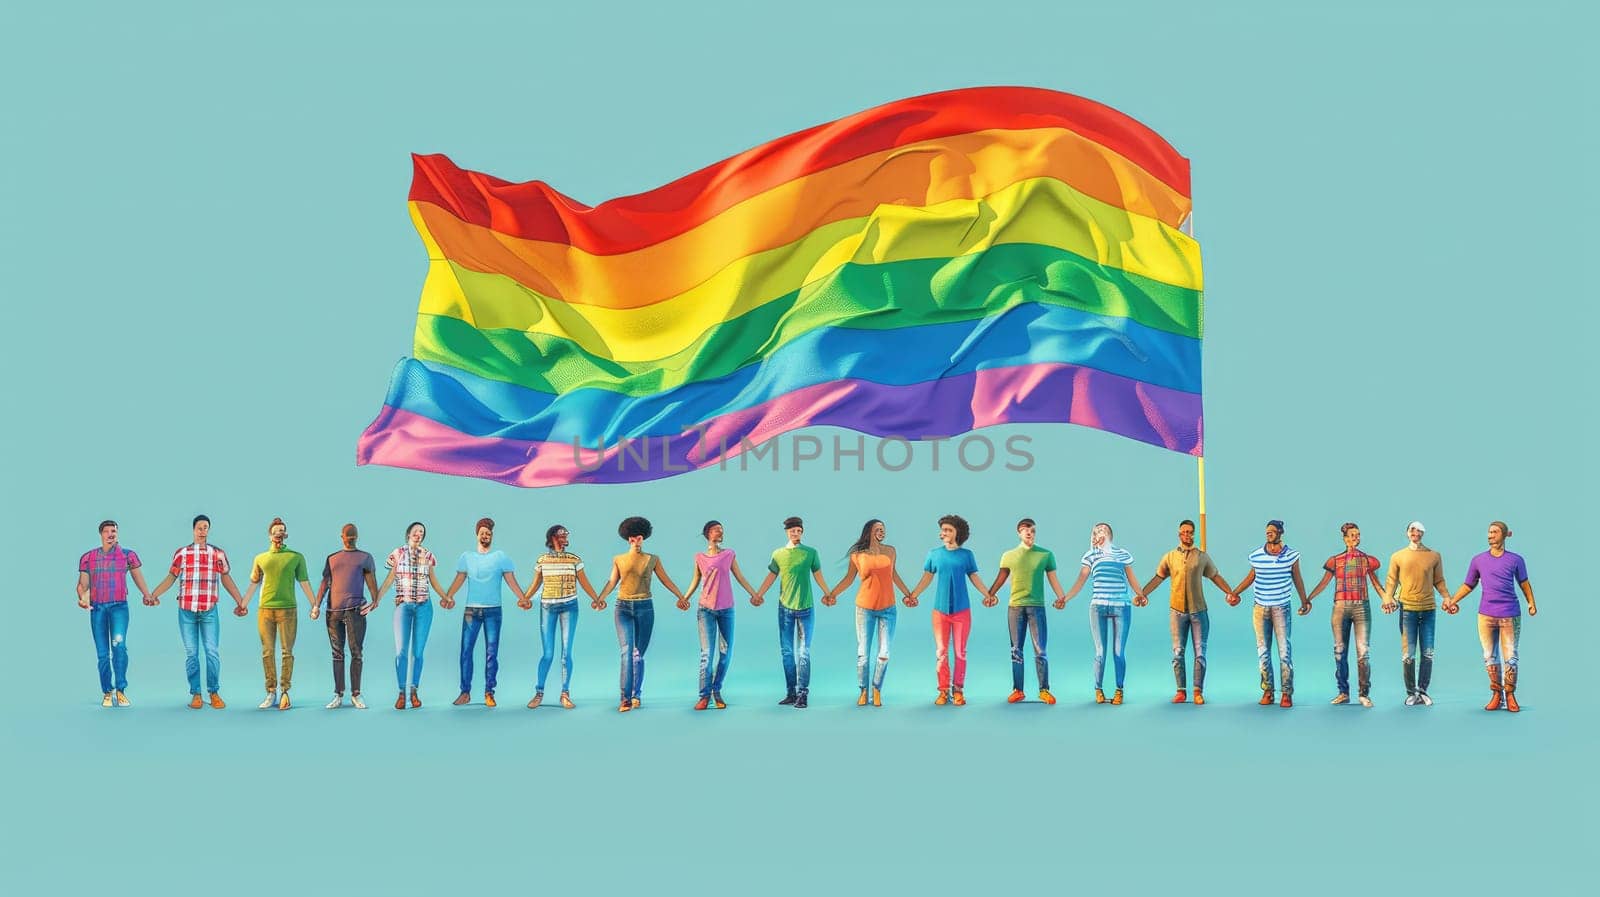 An illustration of a diverse group of people holding hands and forming a circle, with a large rainbow flag waving above them, against a light blue background, representing pride and community.